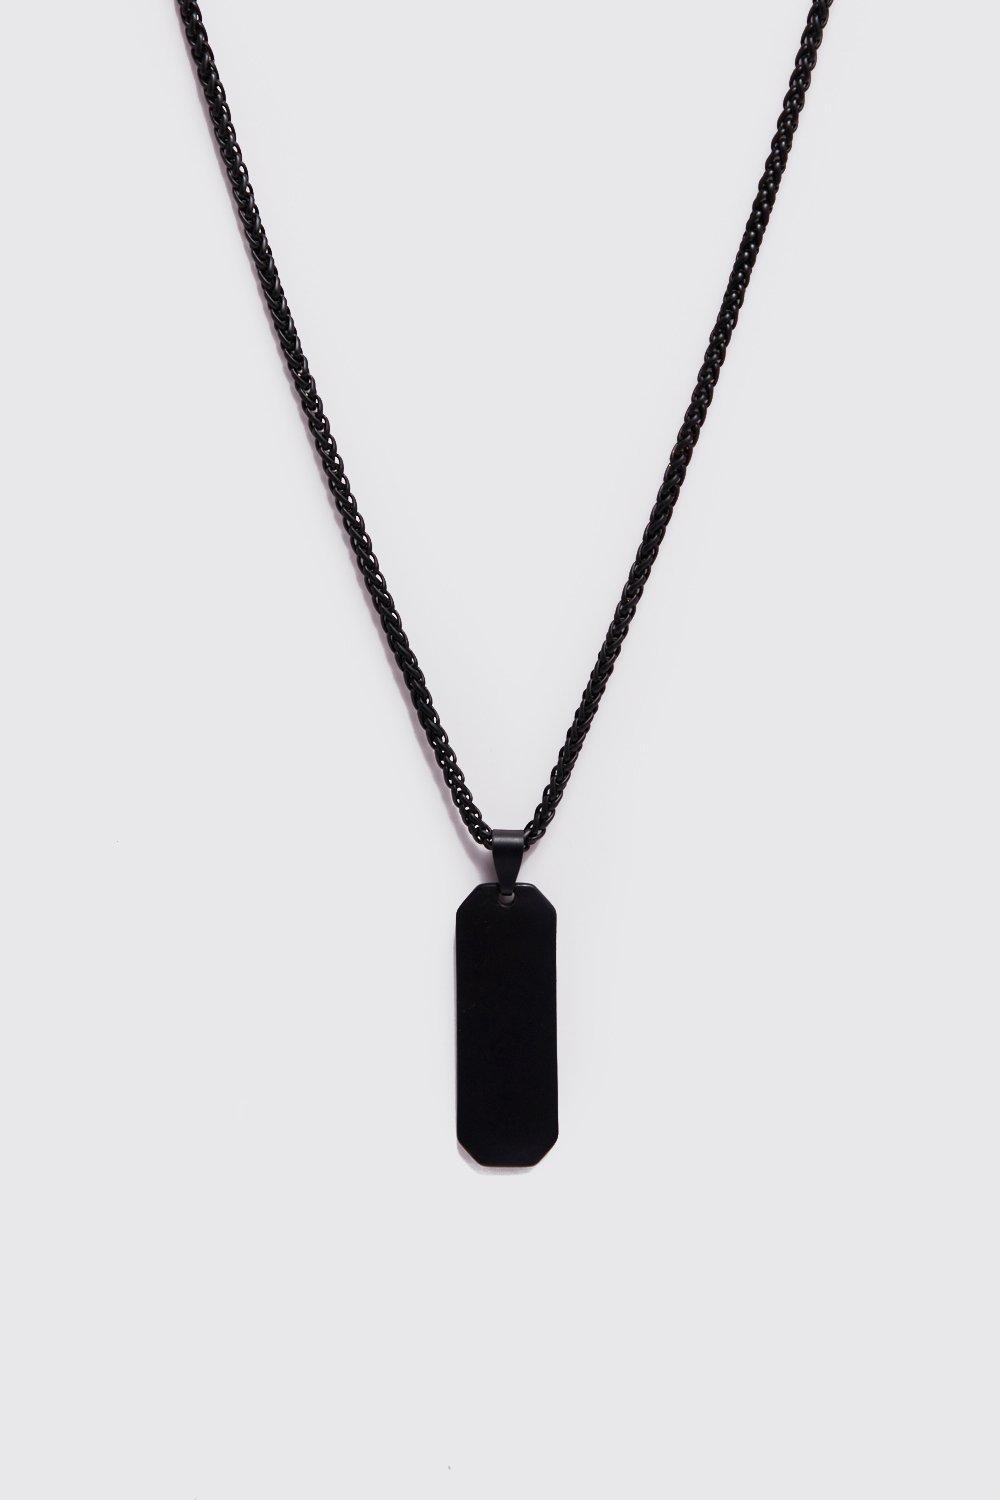 Men's necklace｜Women's necklace｜Mens accessory& Women jewelry｜black  friday｜name necklace